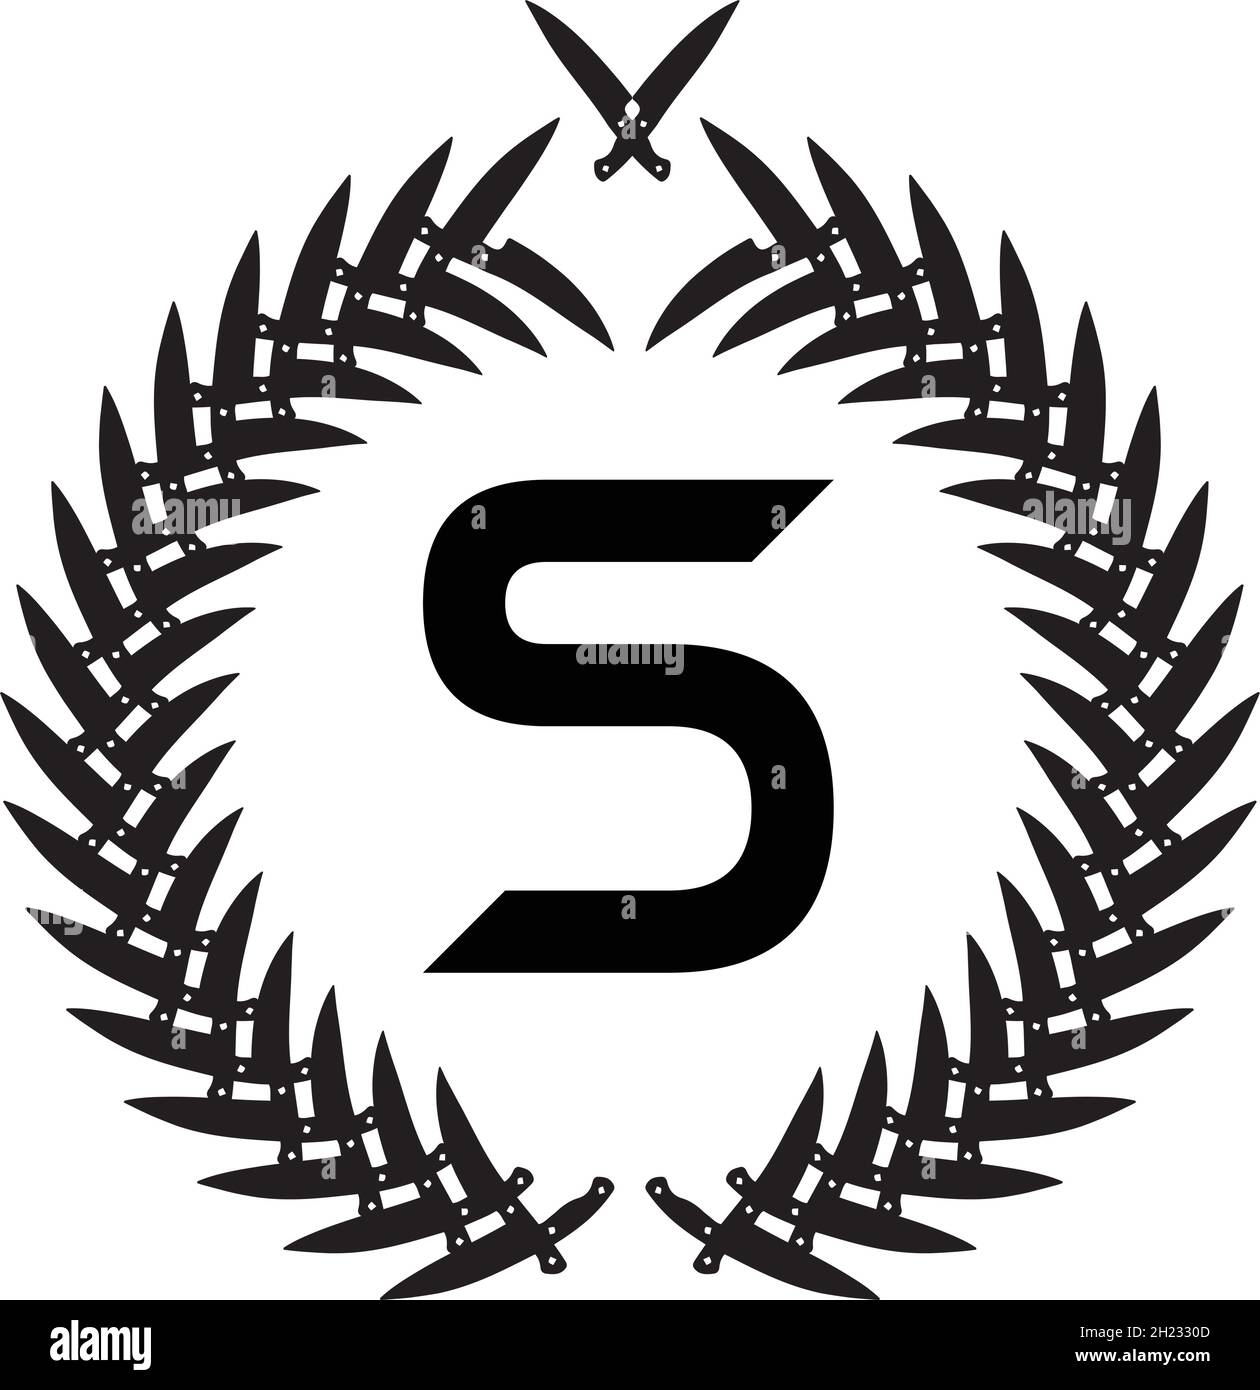 LETTER S LOGO WITH KNIFE ICON FOR ILLUSTRATION USE Stock Vector